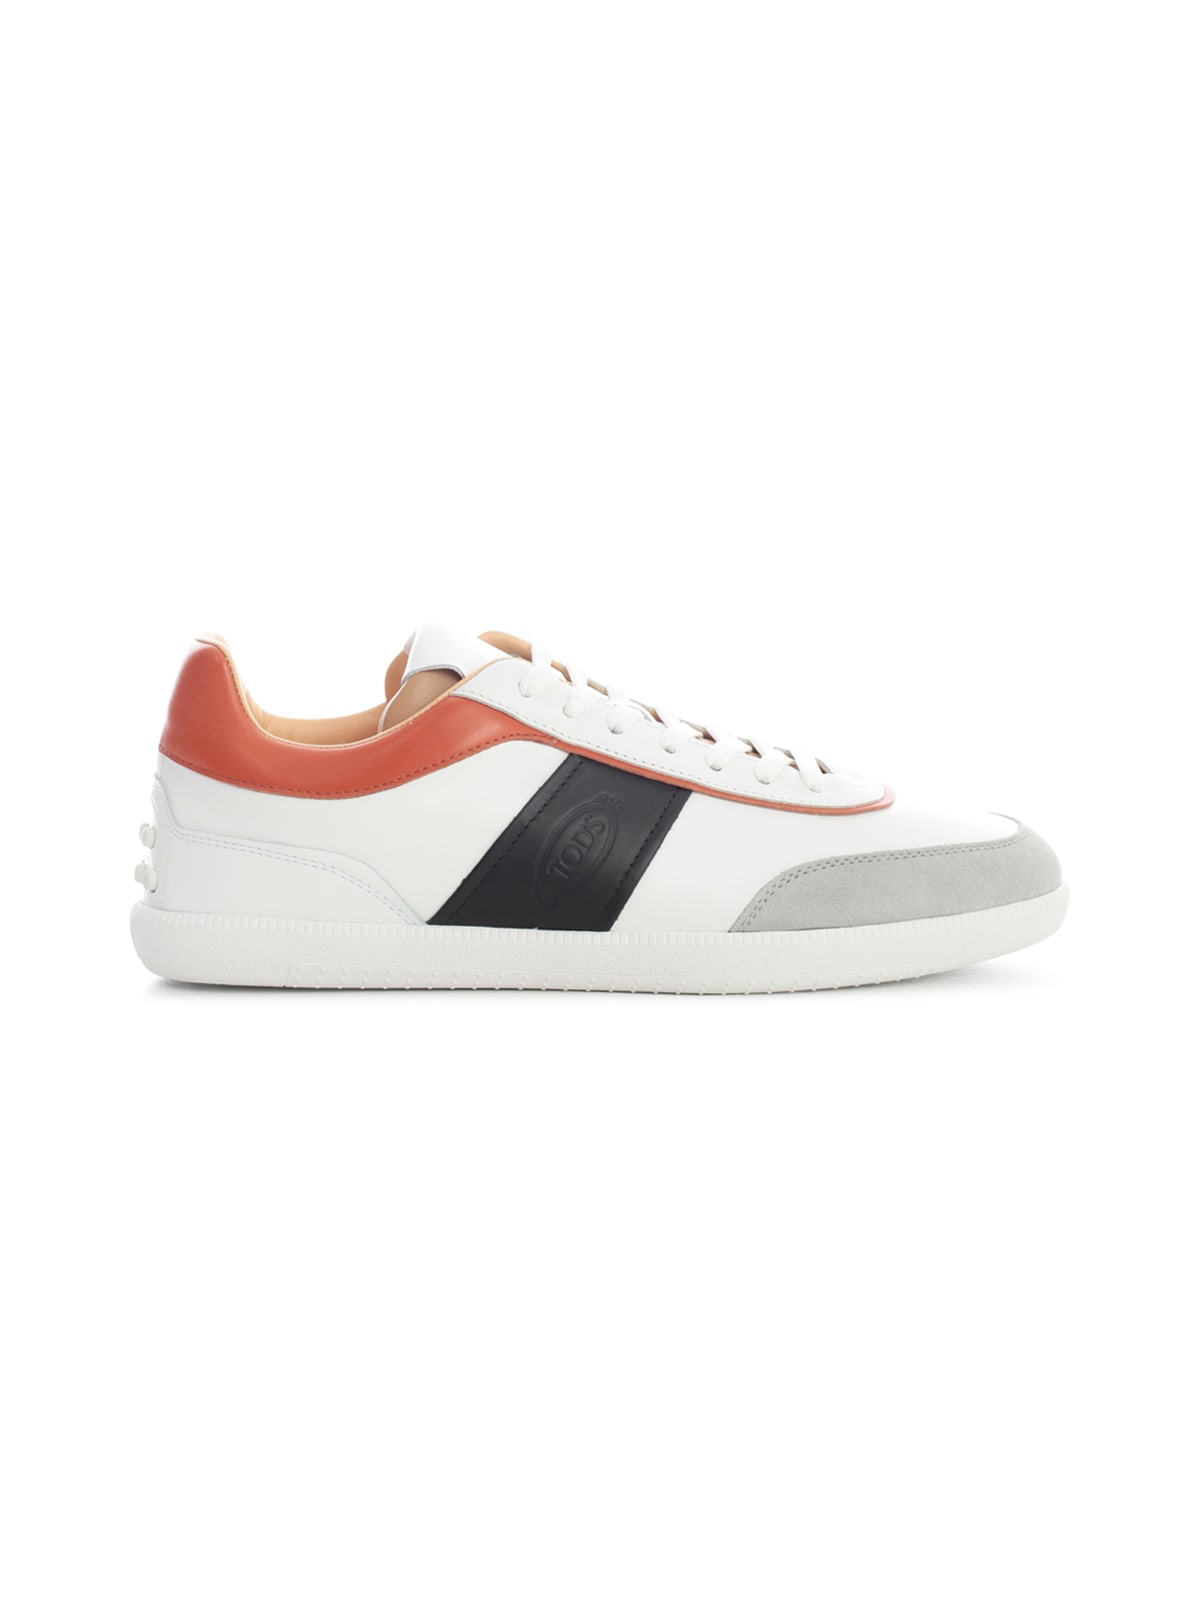 Tods Leather Sneakers W/contrast Band